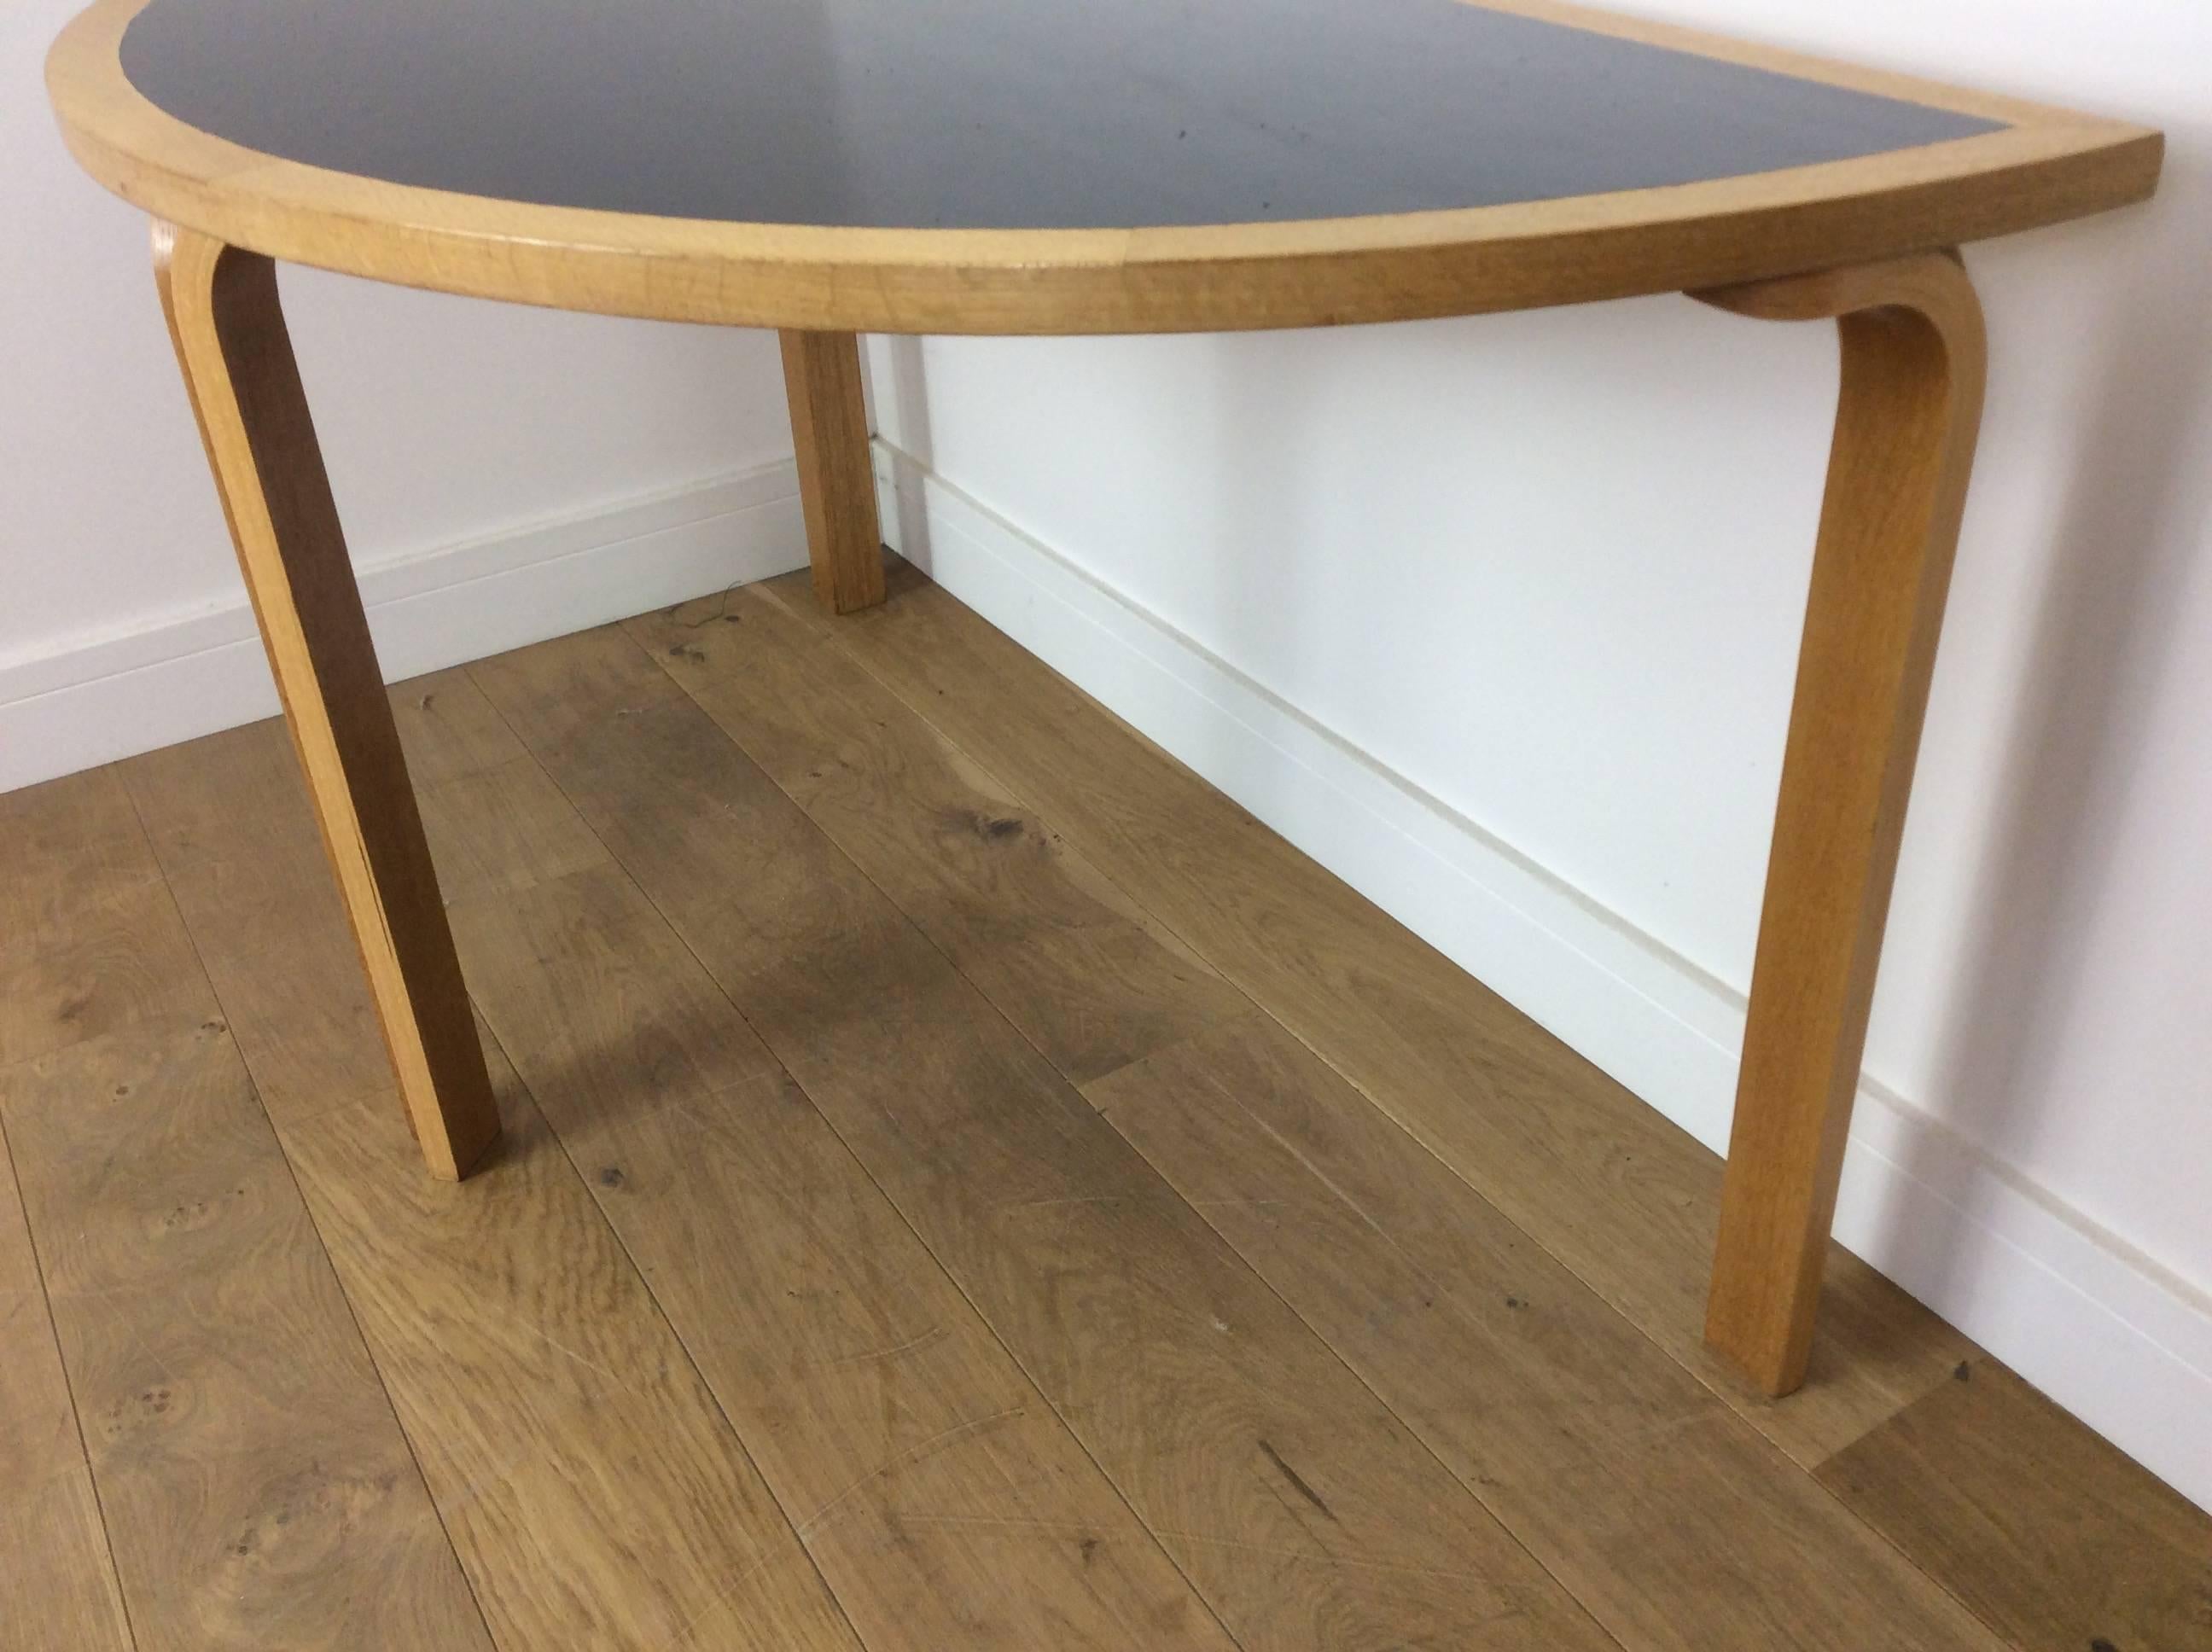 Midcentury Console Tables In Good Condition For Sale In London, GB